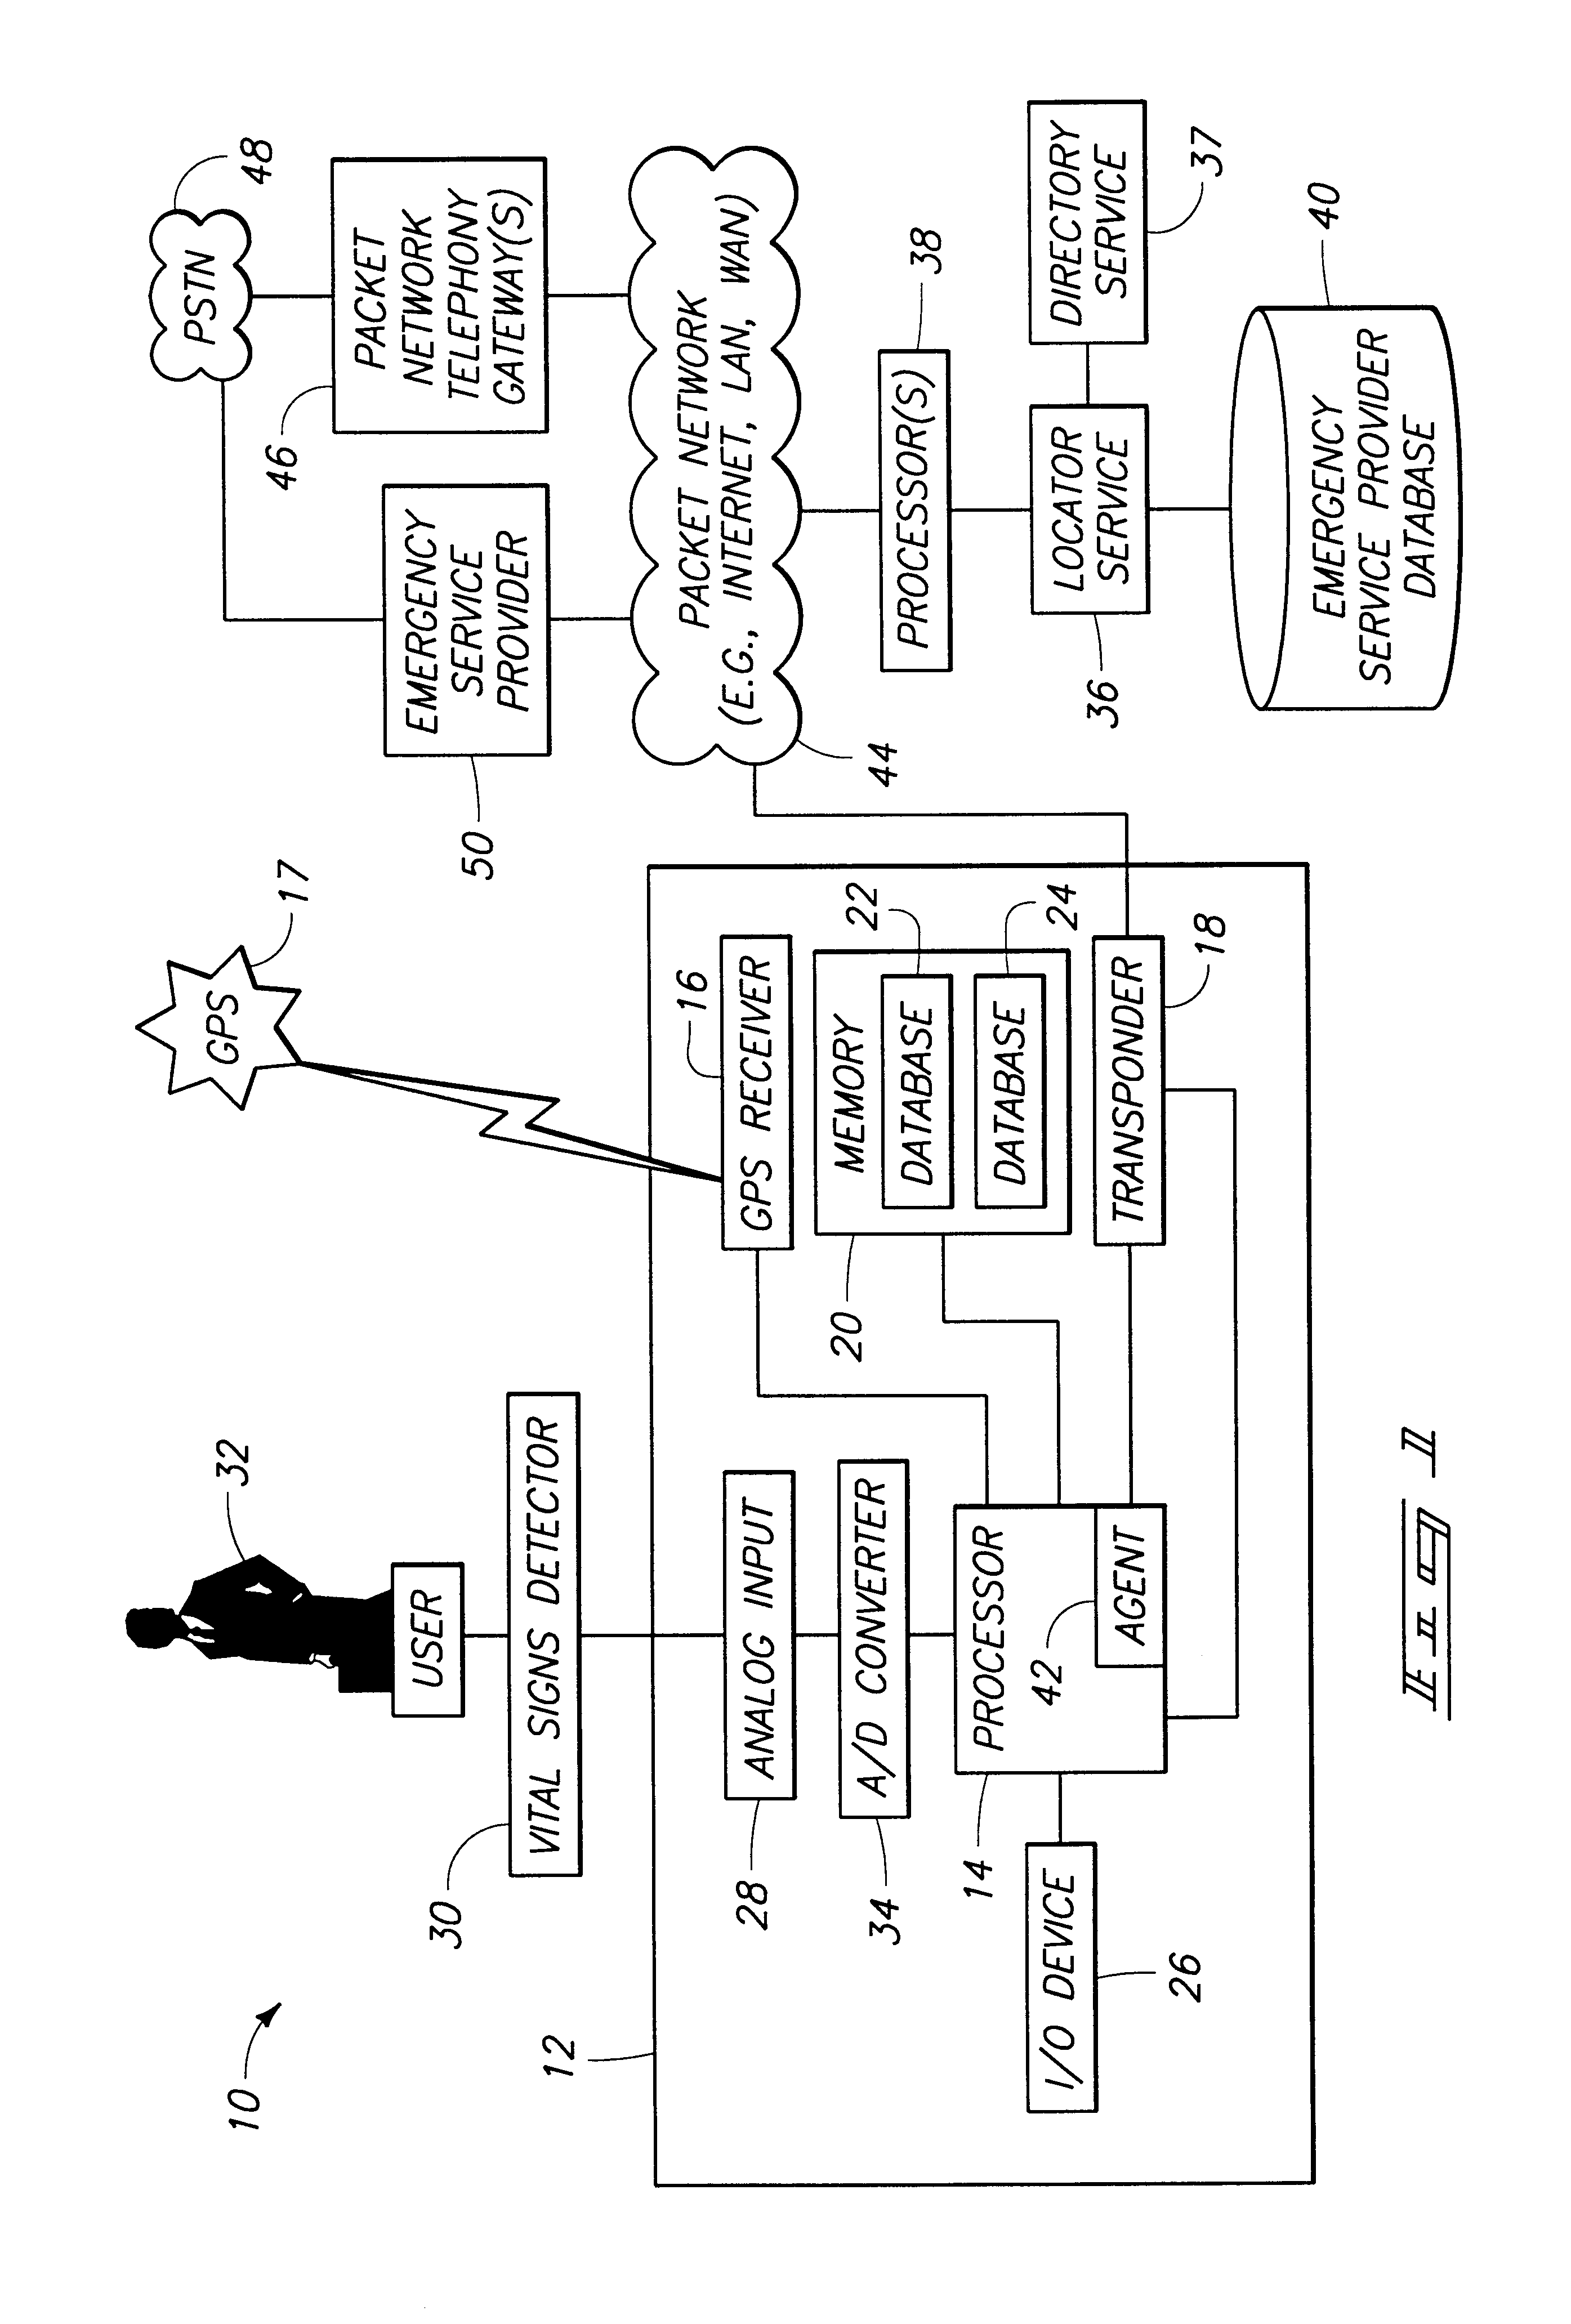 Mobile data device and method of locating mobile data device